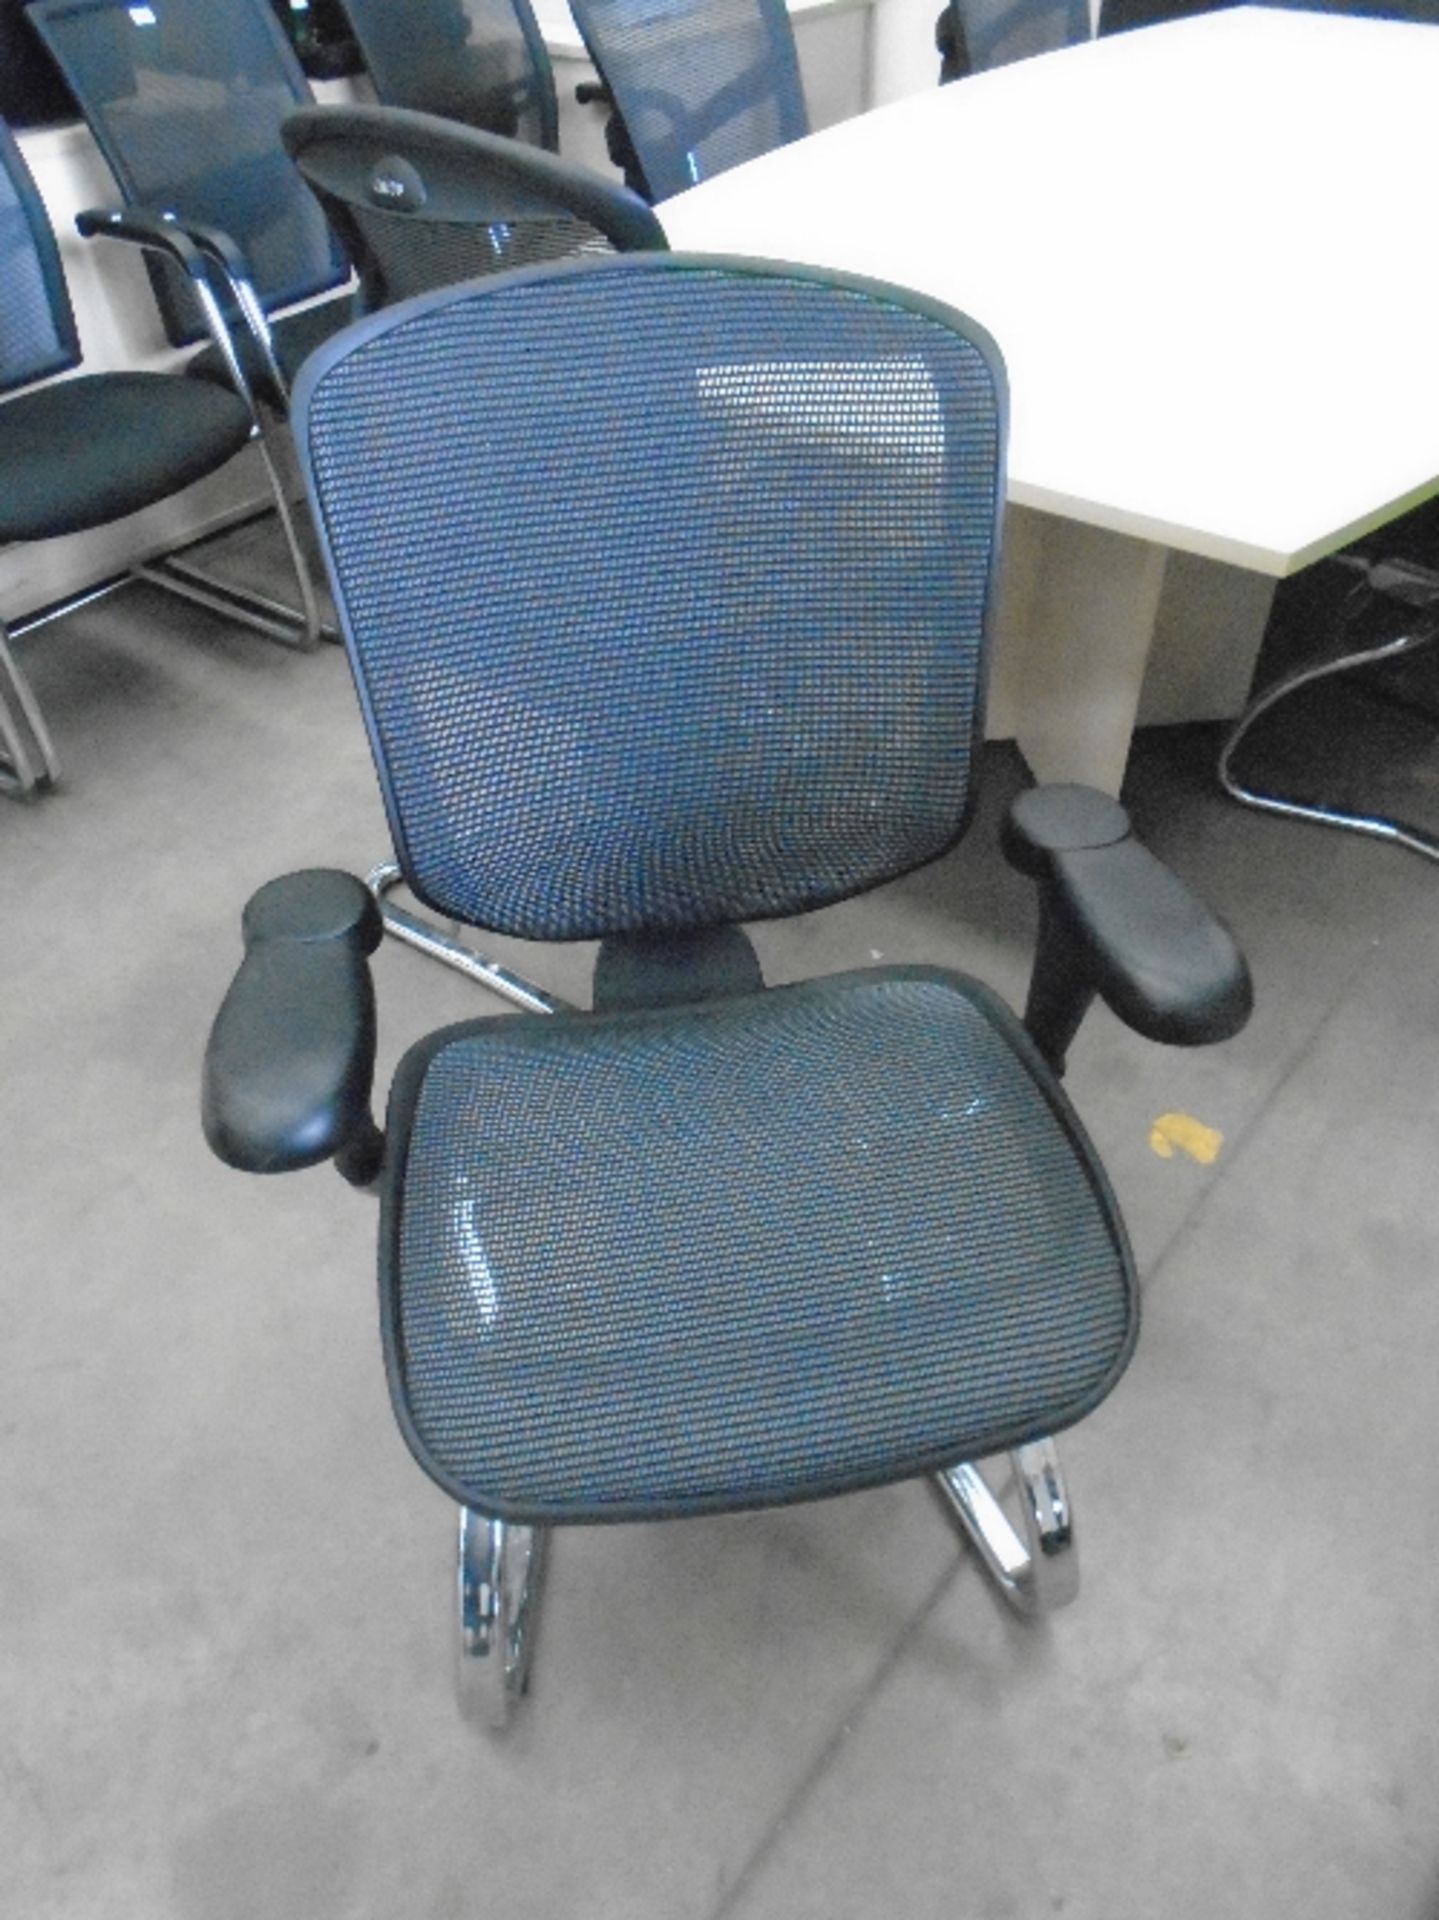 An Enjoy black upholstered boardroom chair with netted support back and adjustable arm rests on